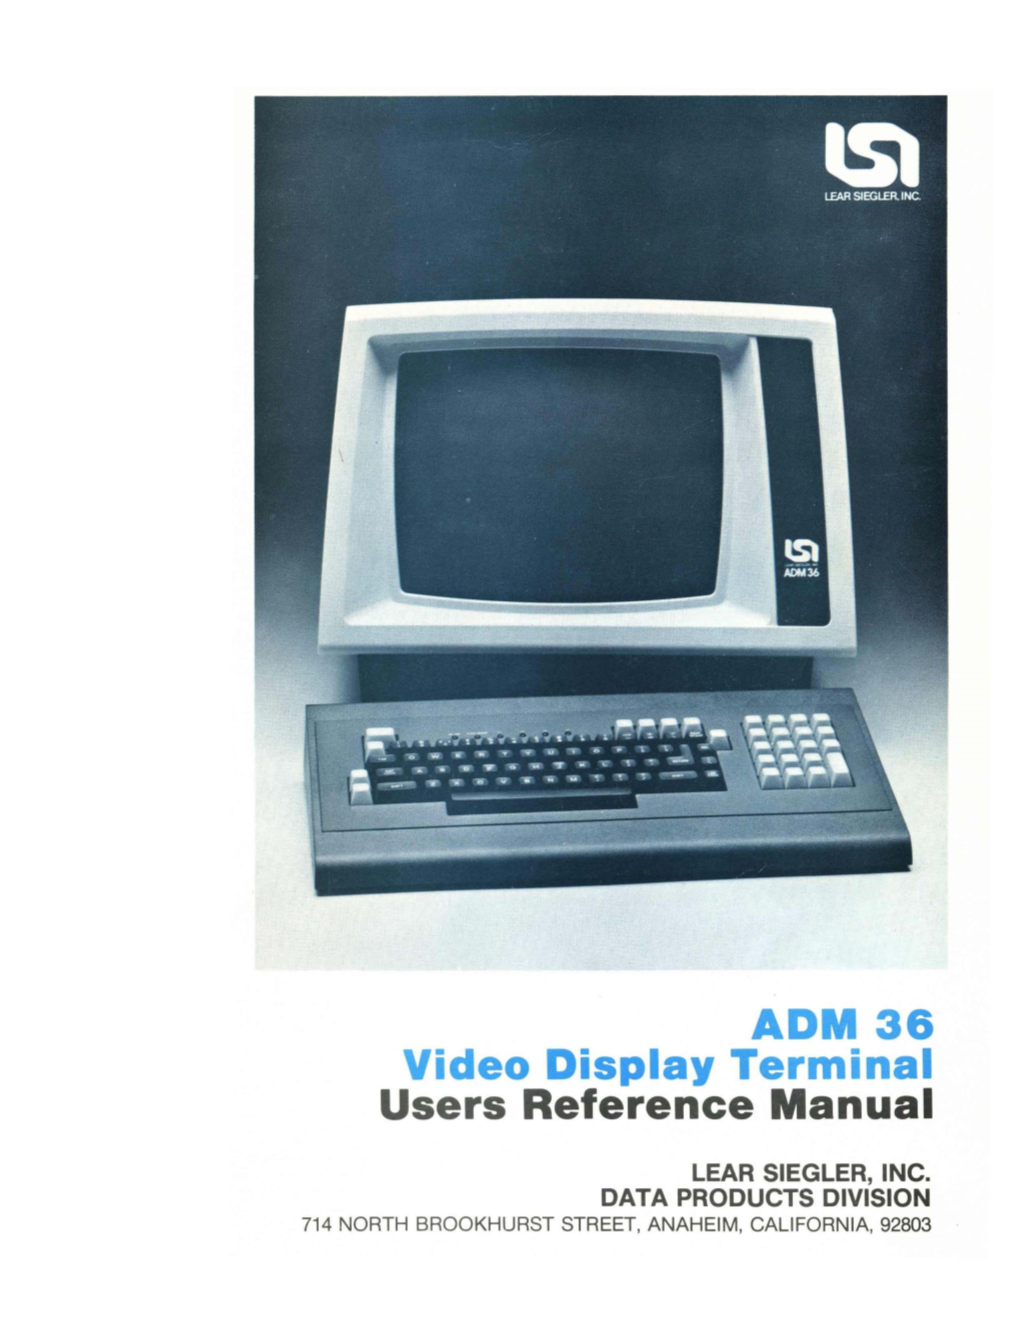 ADM 36 Video Display Terminal Users Reference Manual